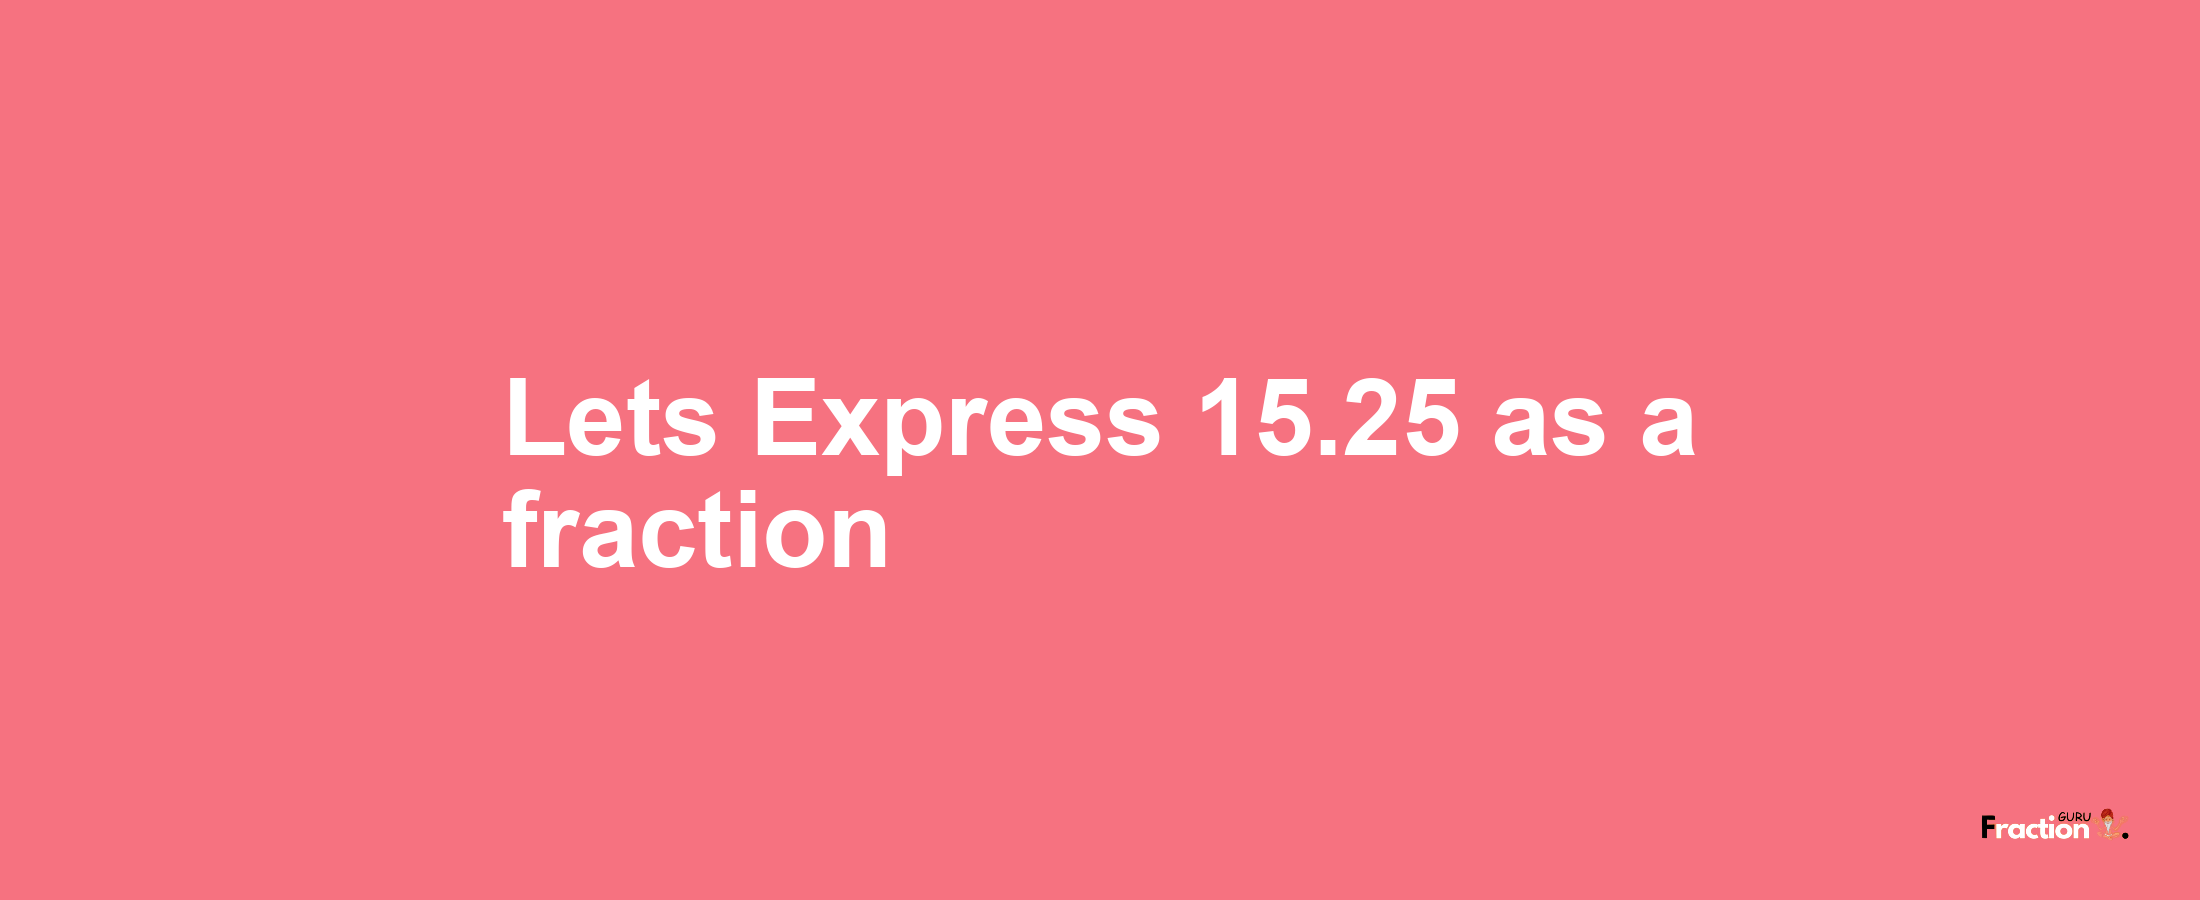 Lets Express 15.25 as afraction